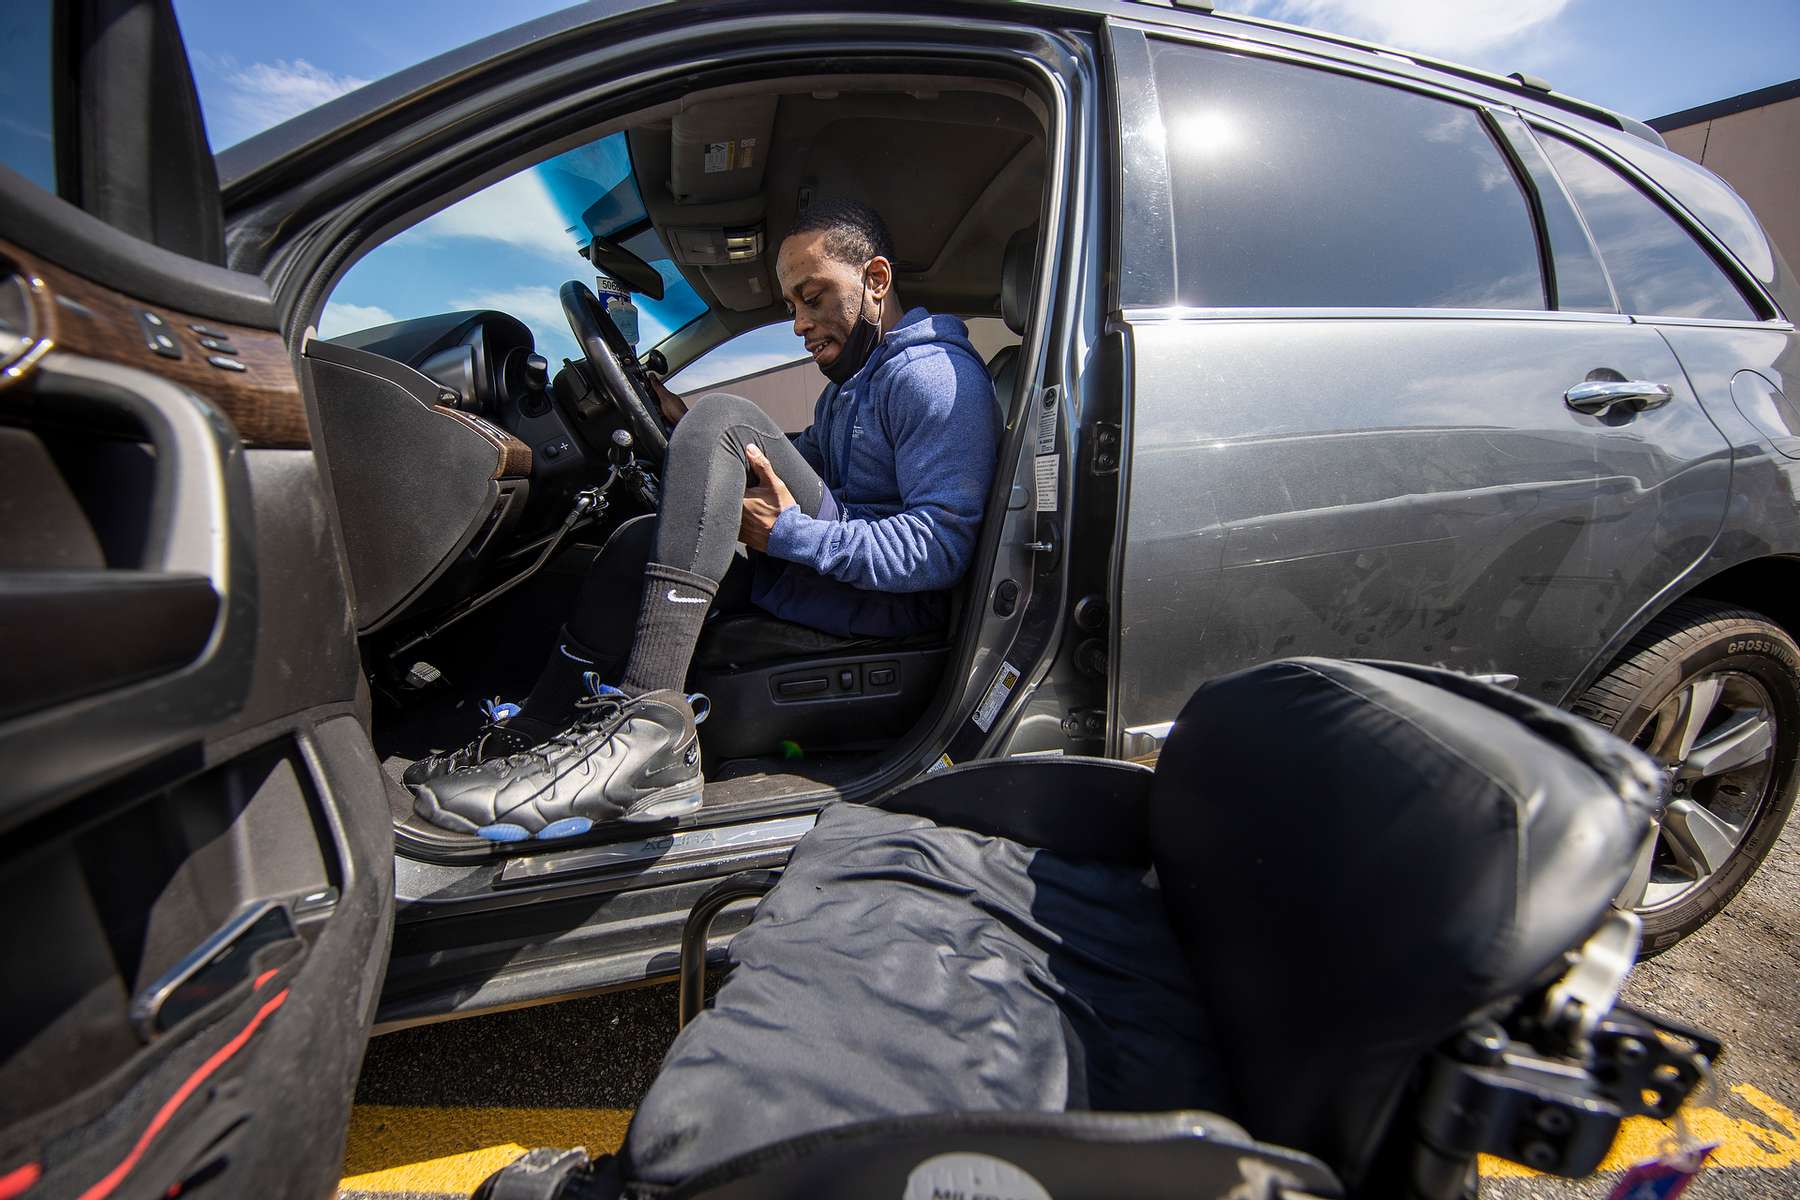 Team USA Para Powerlifter Garrison Redd lifts himself and his wheelchair into his car after training at Gaglione Strength Gym on April 07, 2021 in Farmingdale, New York.  